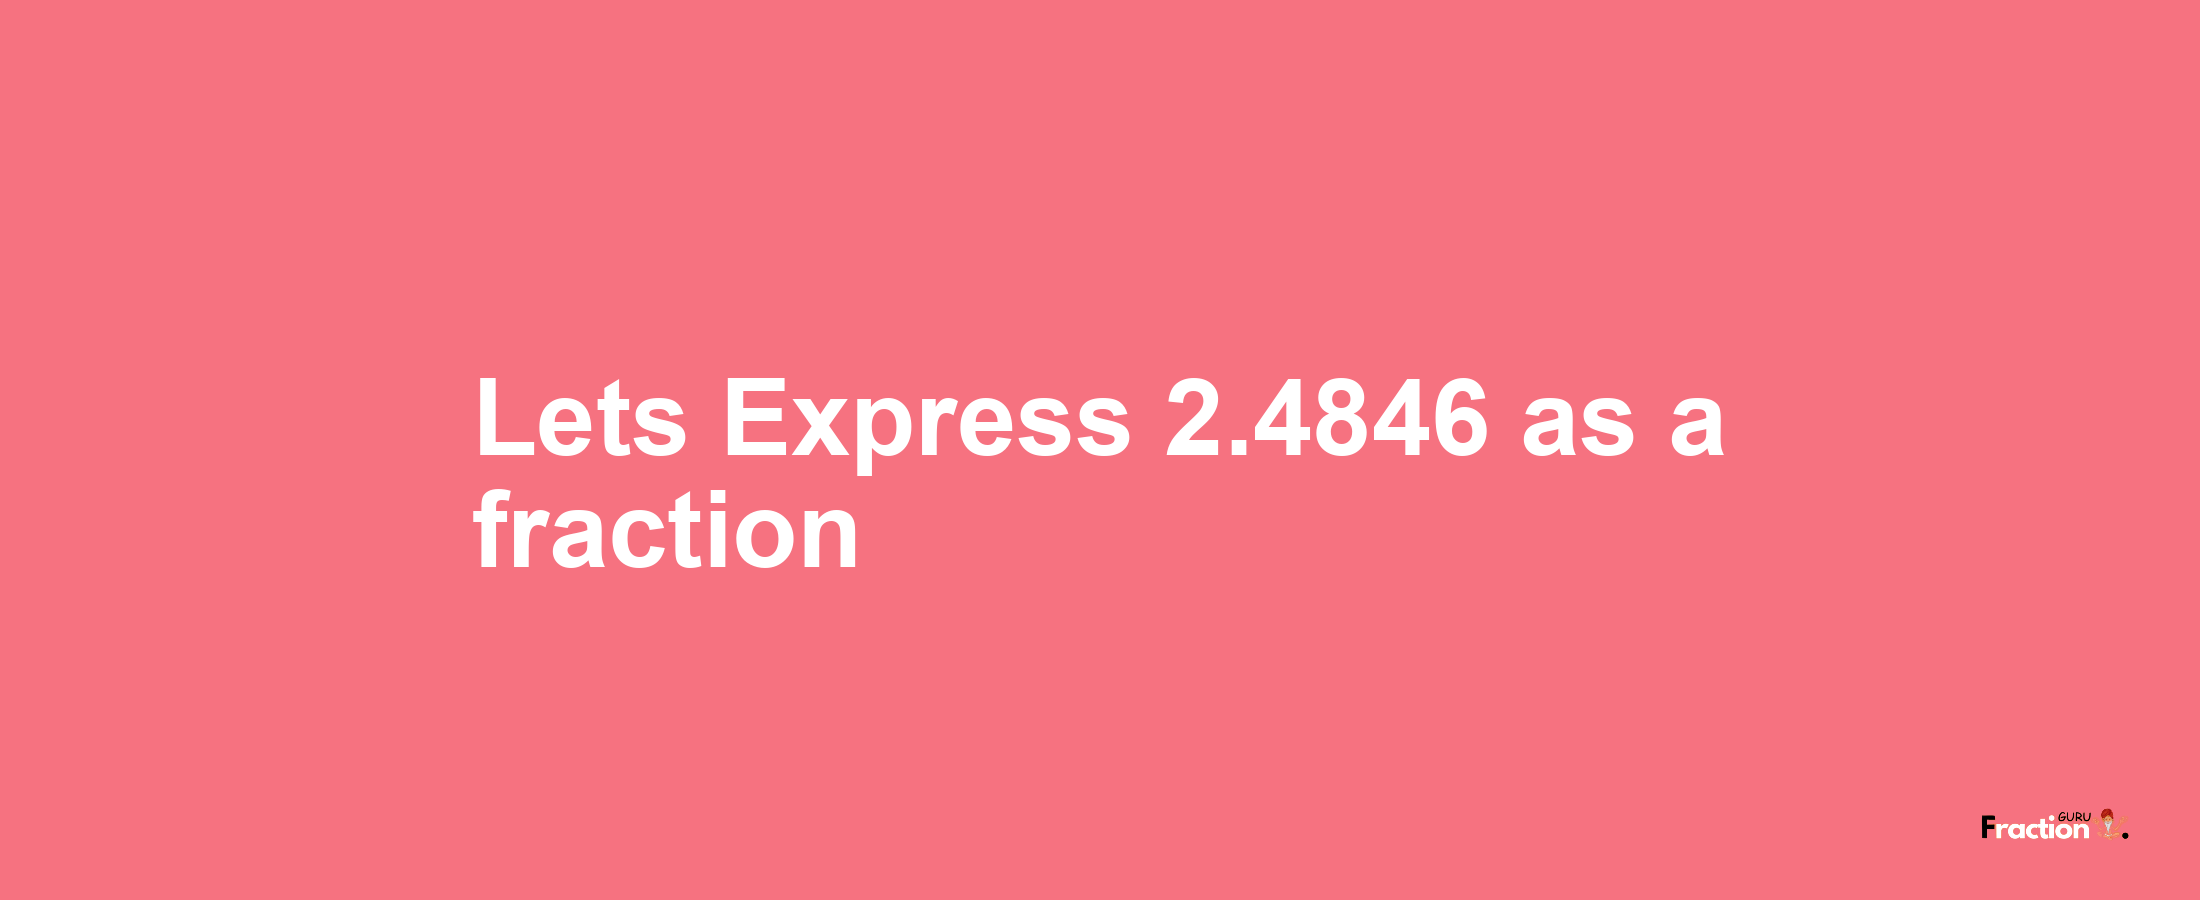 Lets Express 2.4846 as afraction